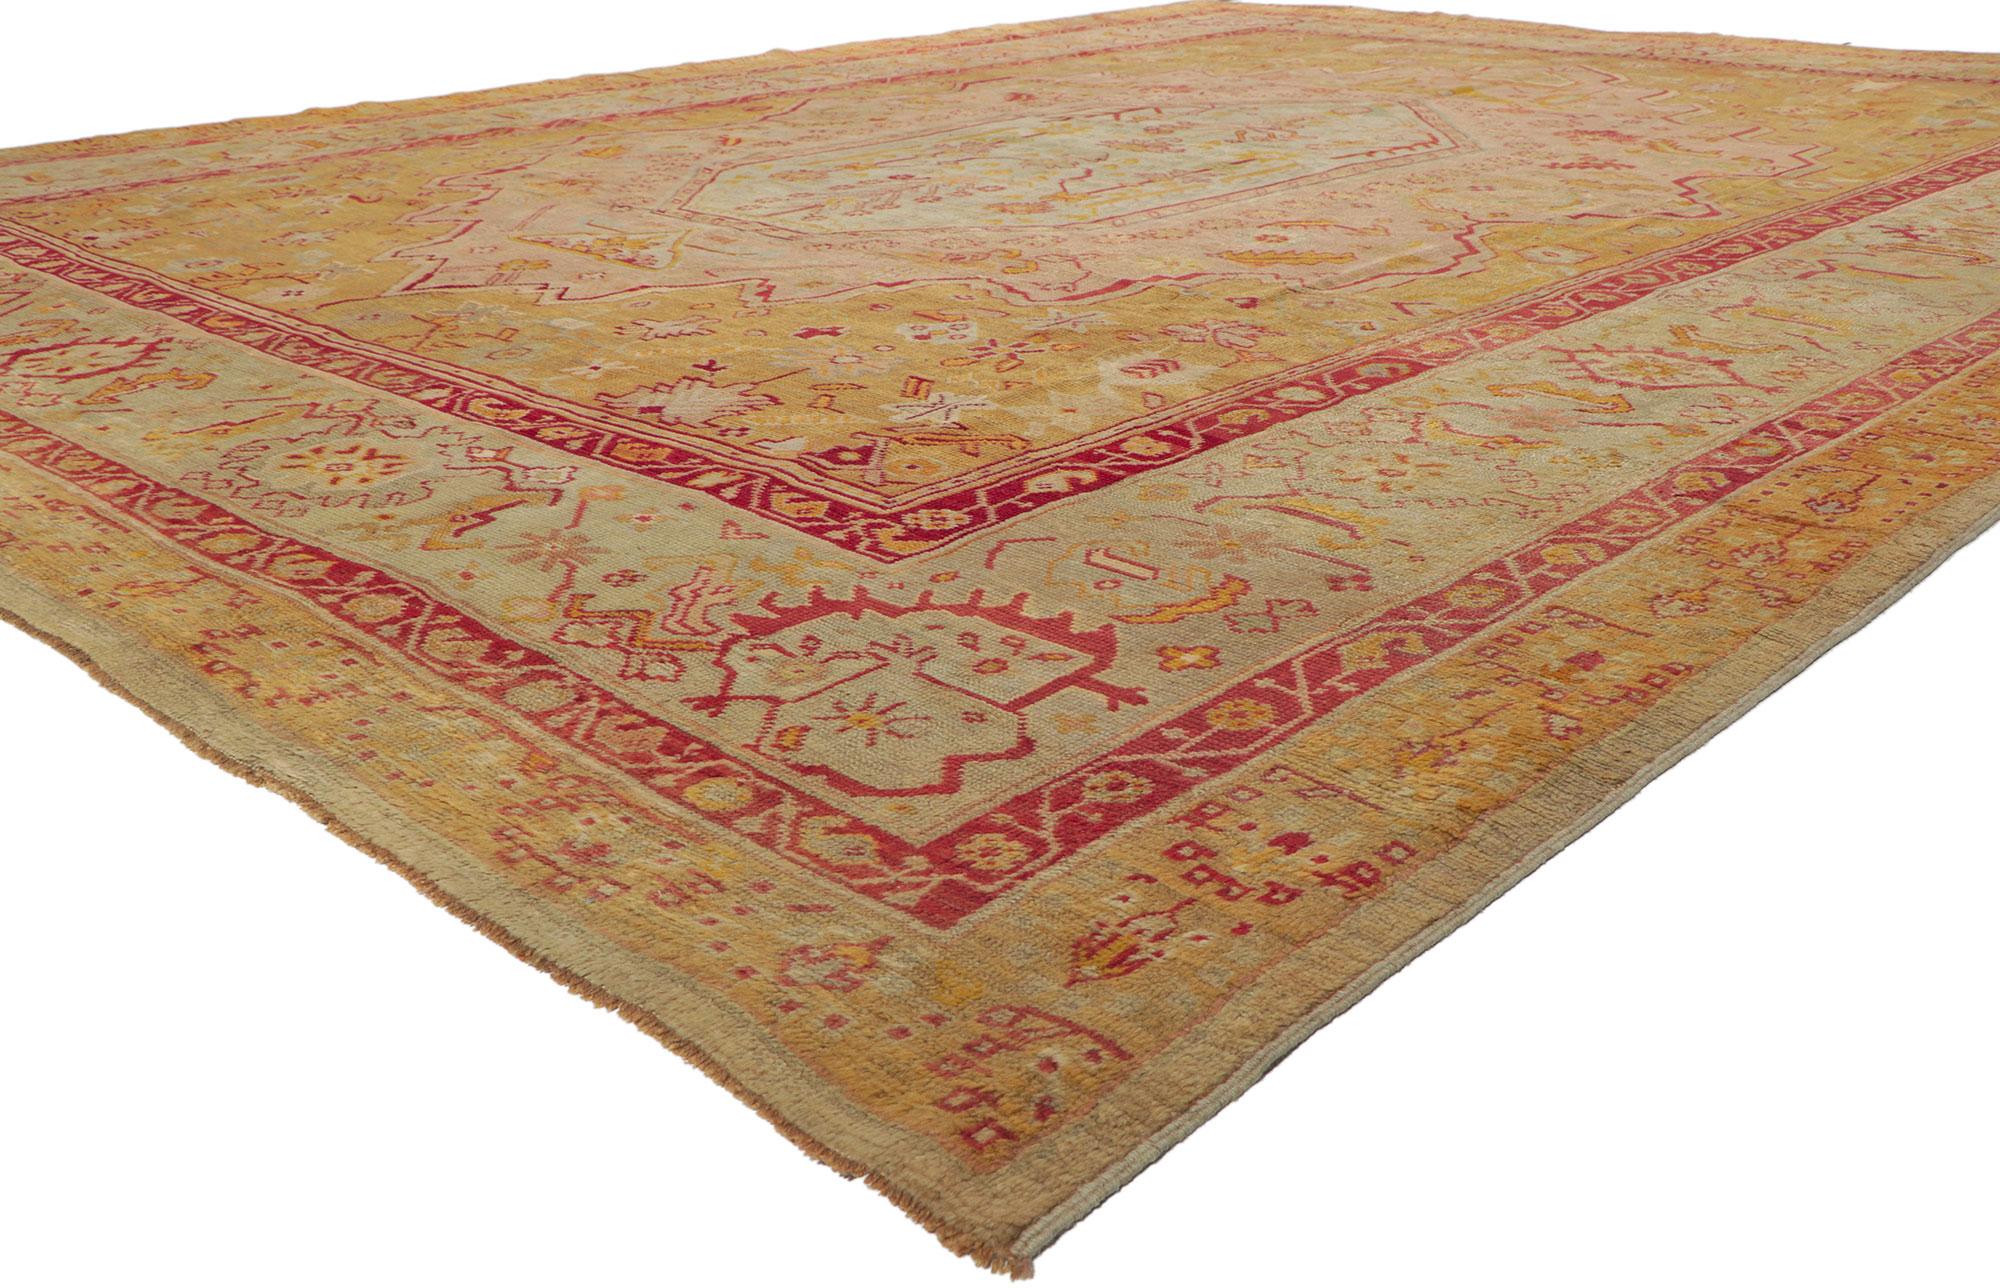 76888 Antique Turkish Oushak Rug, 12'07 x 16'04.
In the seamless fusion of French Provincial elegance and Cosmopolitan Chic, behold the allure of this meticulously hand-knotted antique Turkish Oushak rug. Echoing the artisanal craftsmanship and